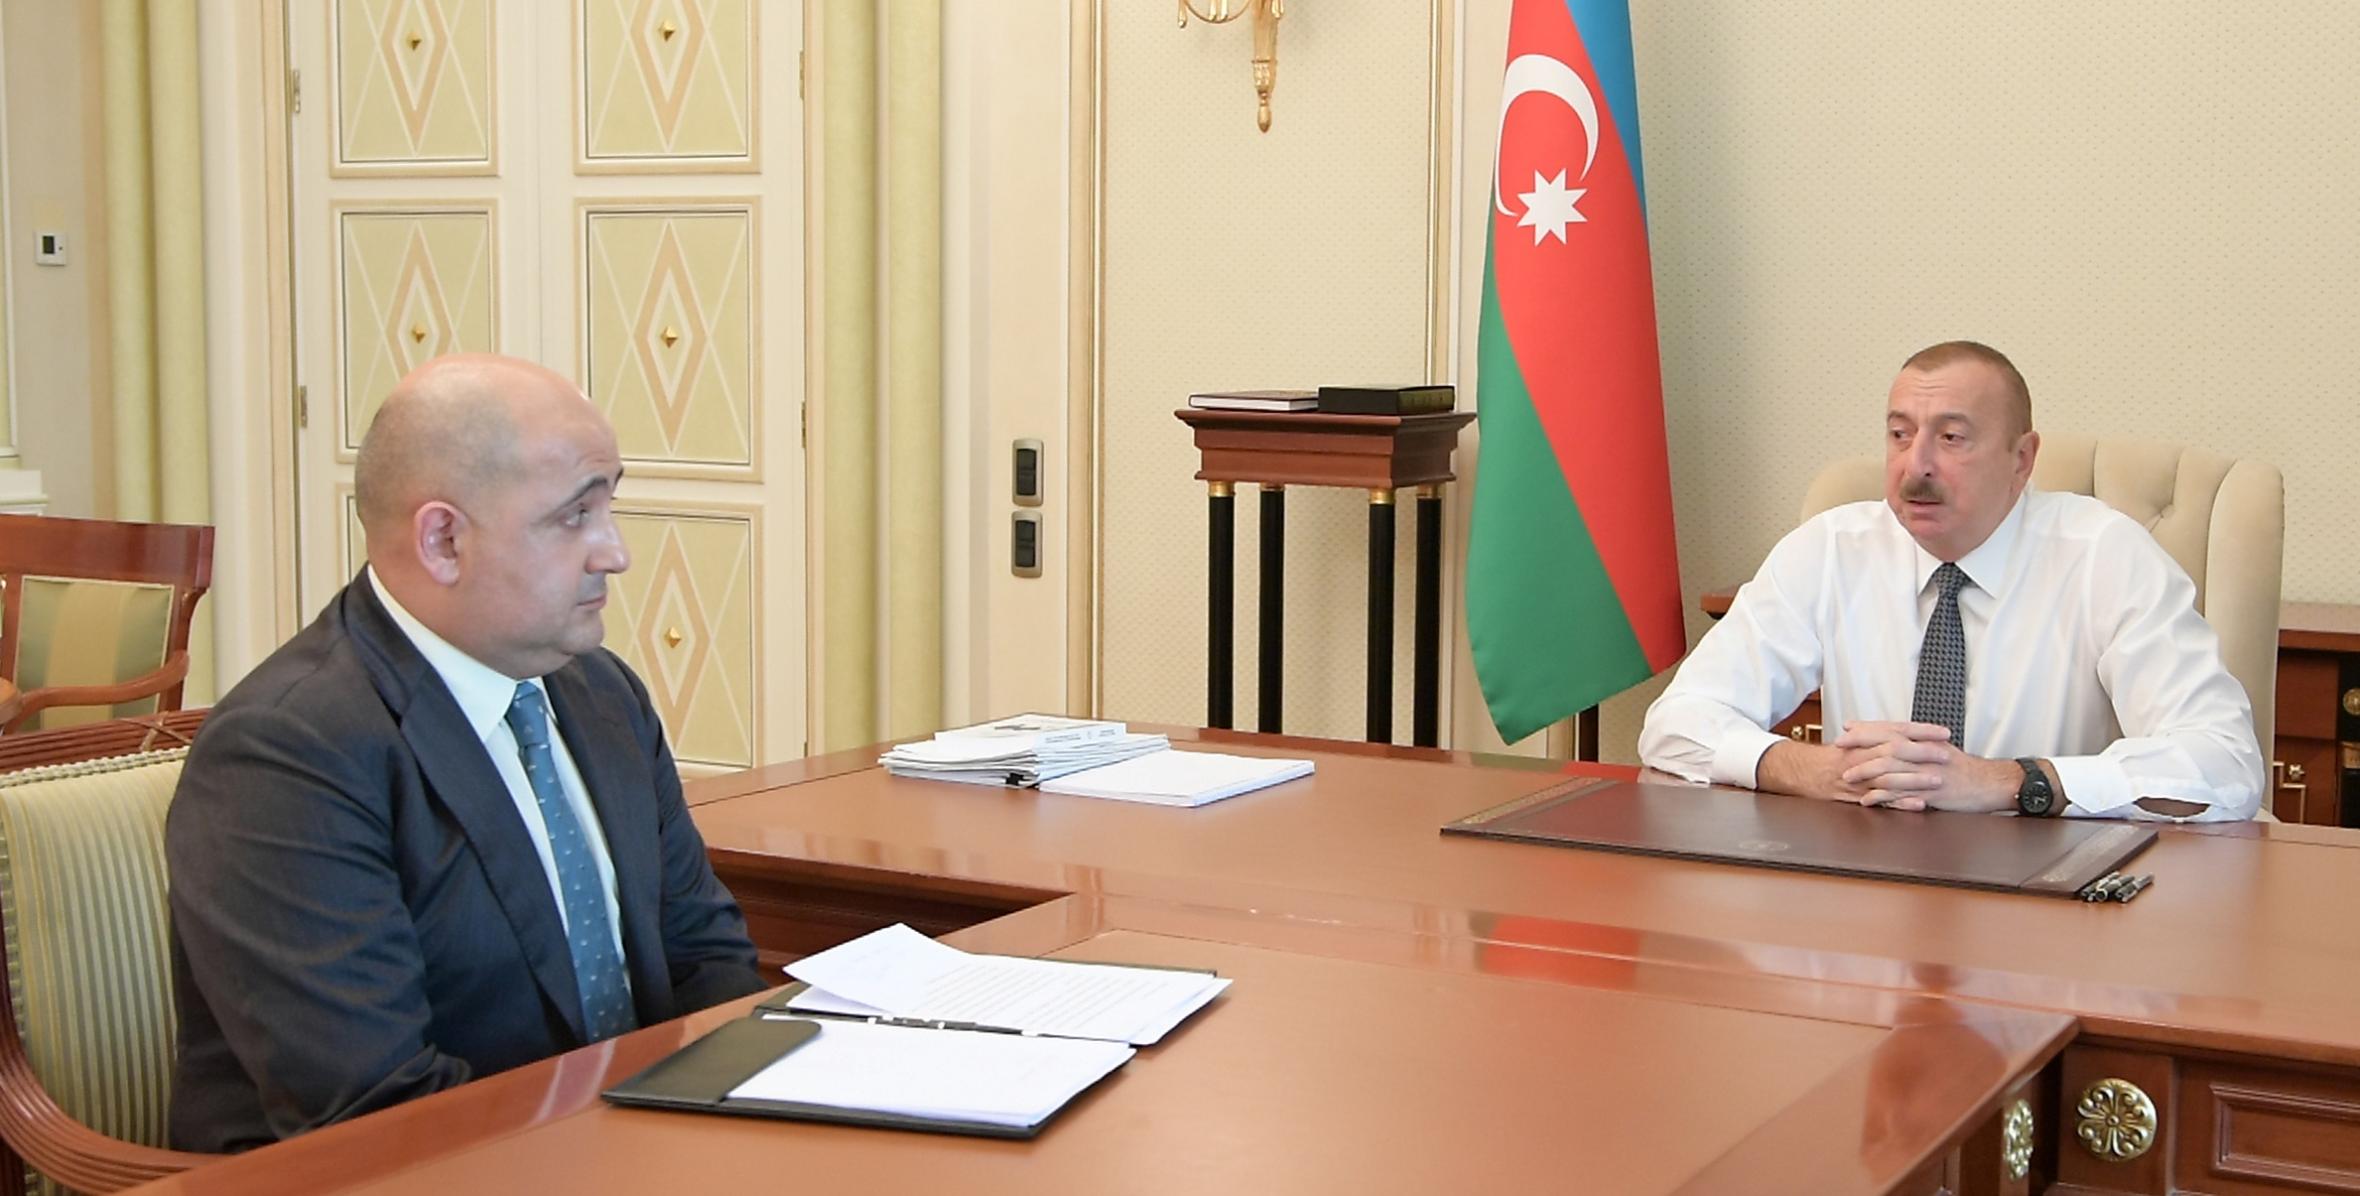 Ilham Aliyev received Israfil Mammadov in connection with his appointment to new post